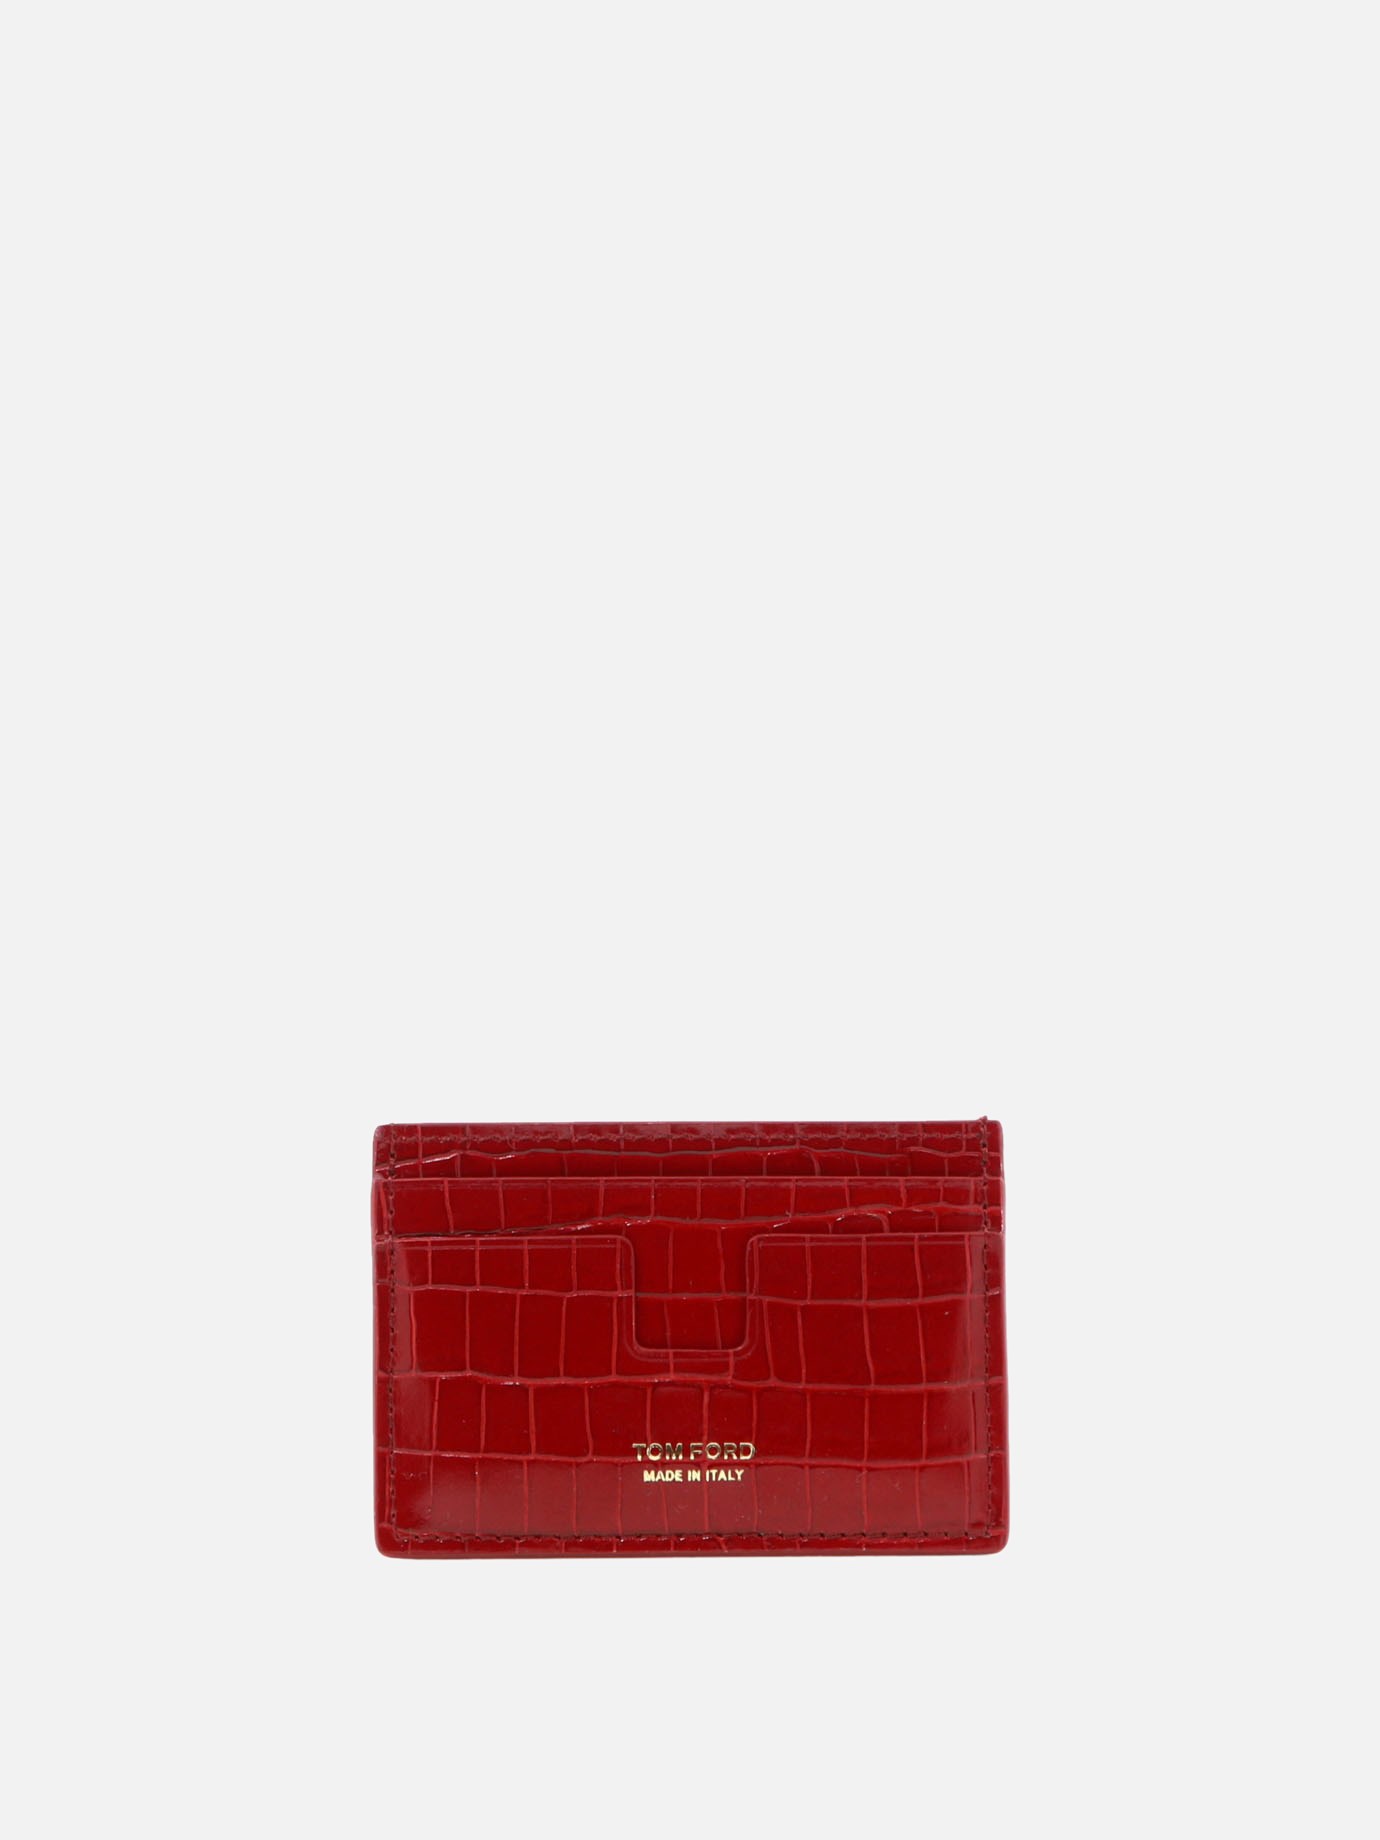 Leather card holderby Tom Ford - 2